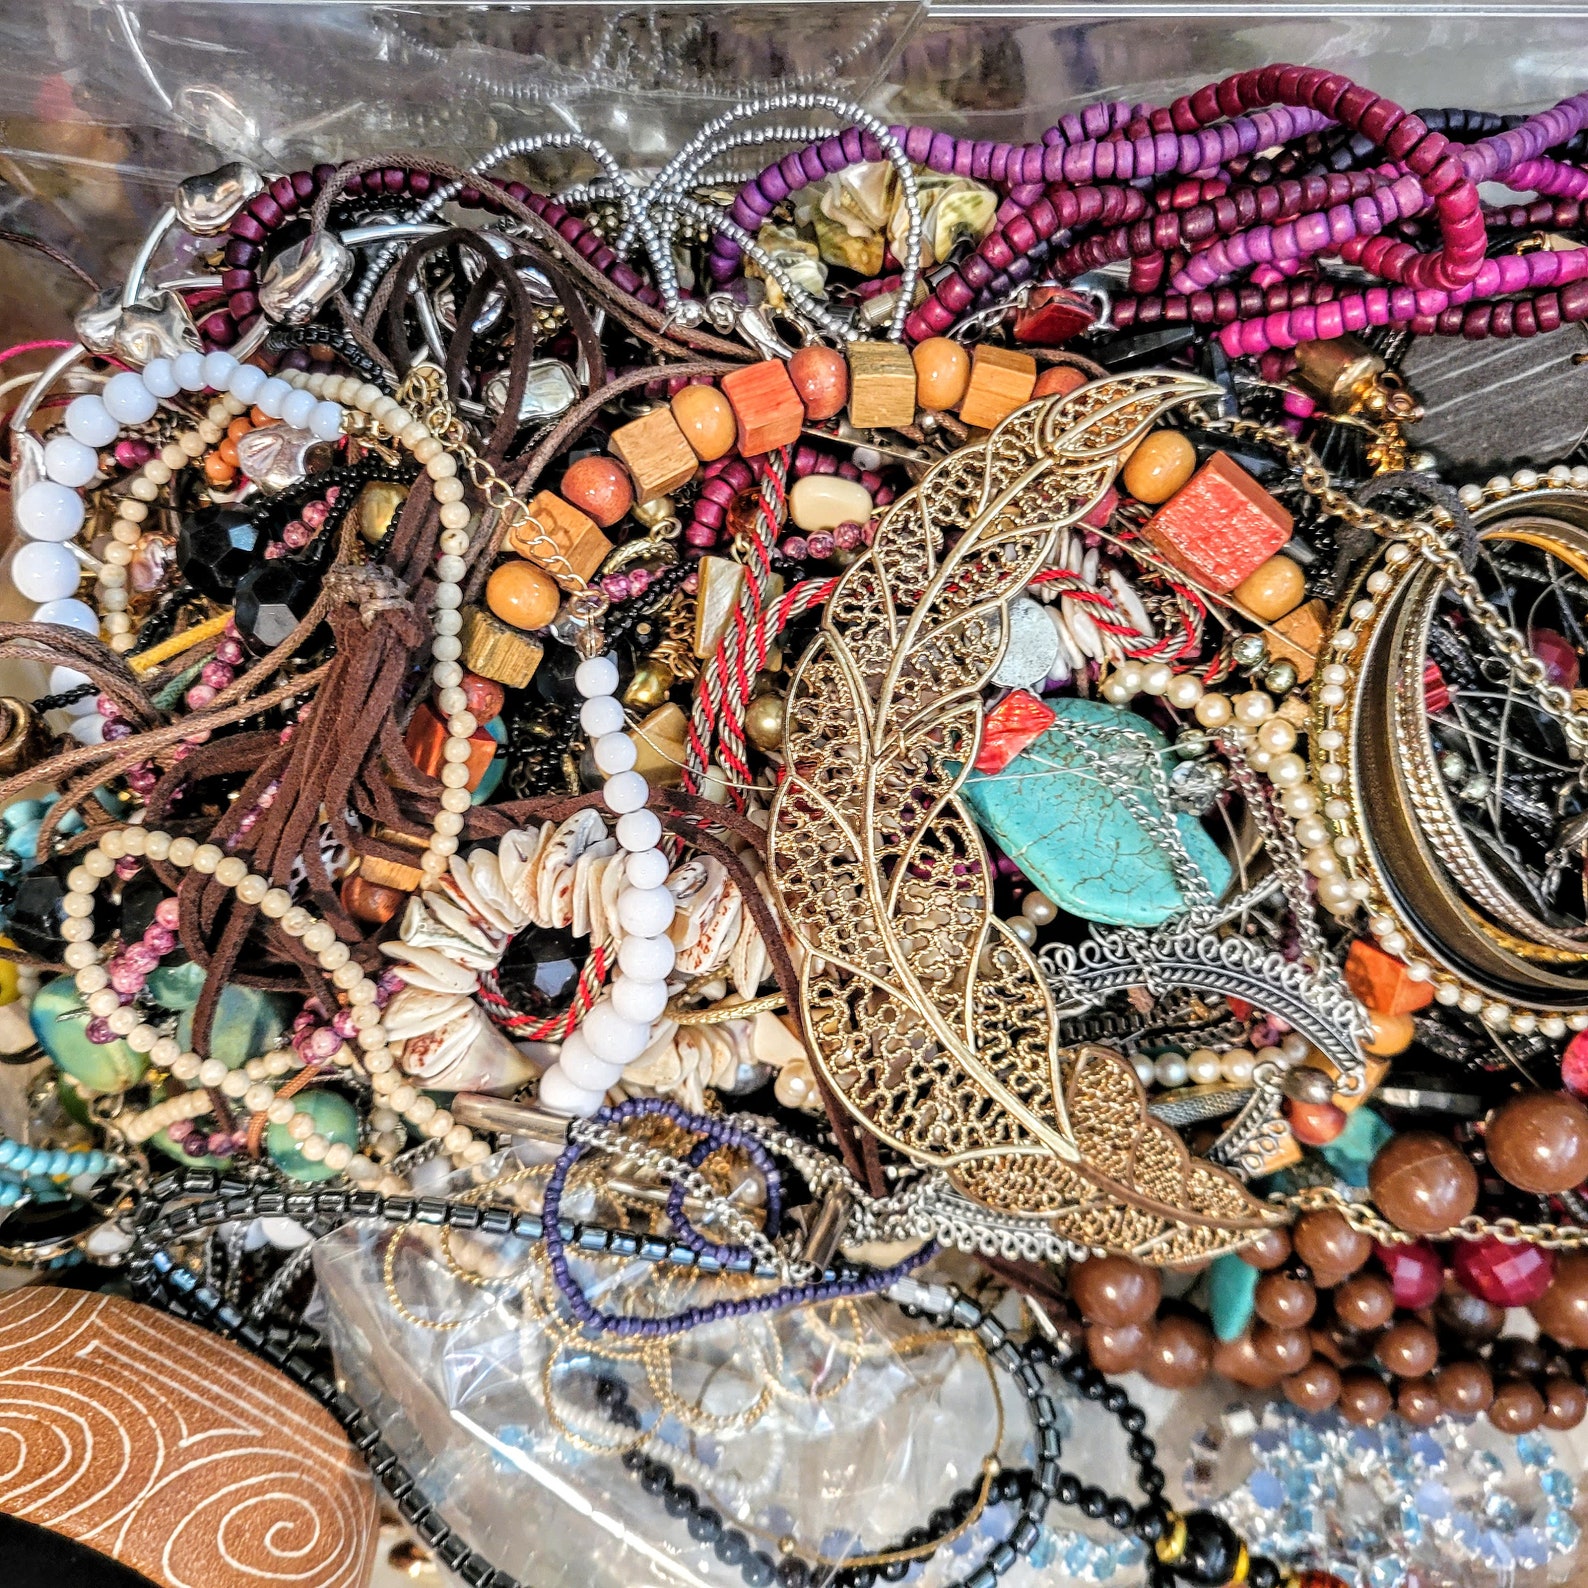 4-5 lbs Nice whole jewelry mystery lot for wearing reselling | Etsy